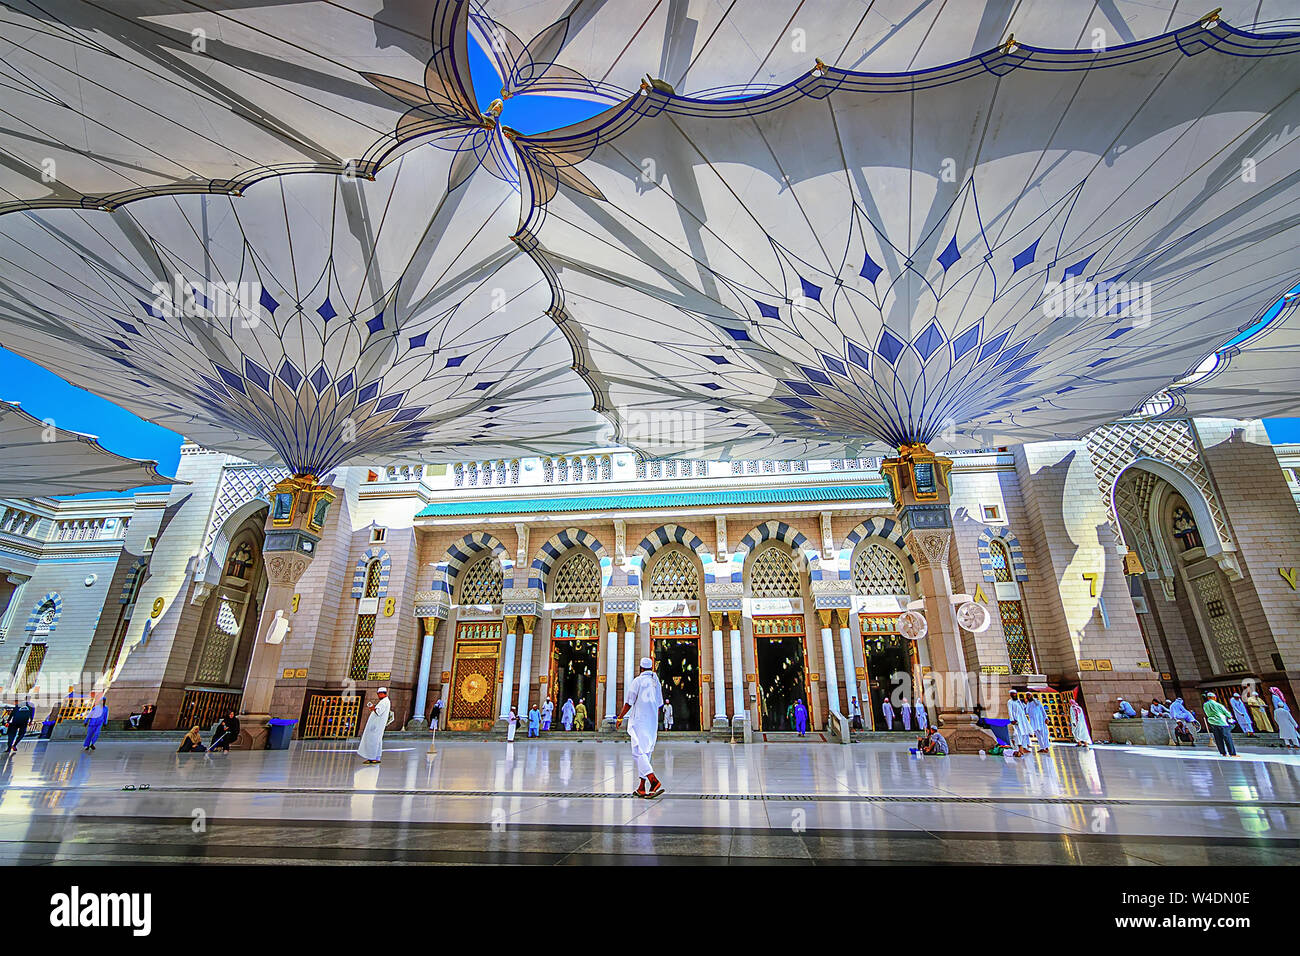 Holy Mosque entrance view in Madinah Saudi Arabia Stock Photo